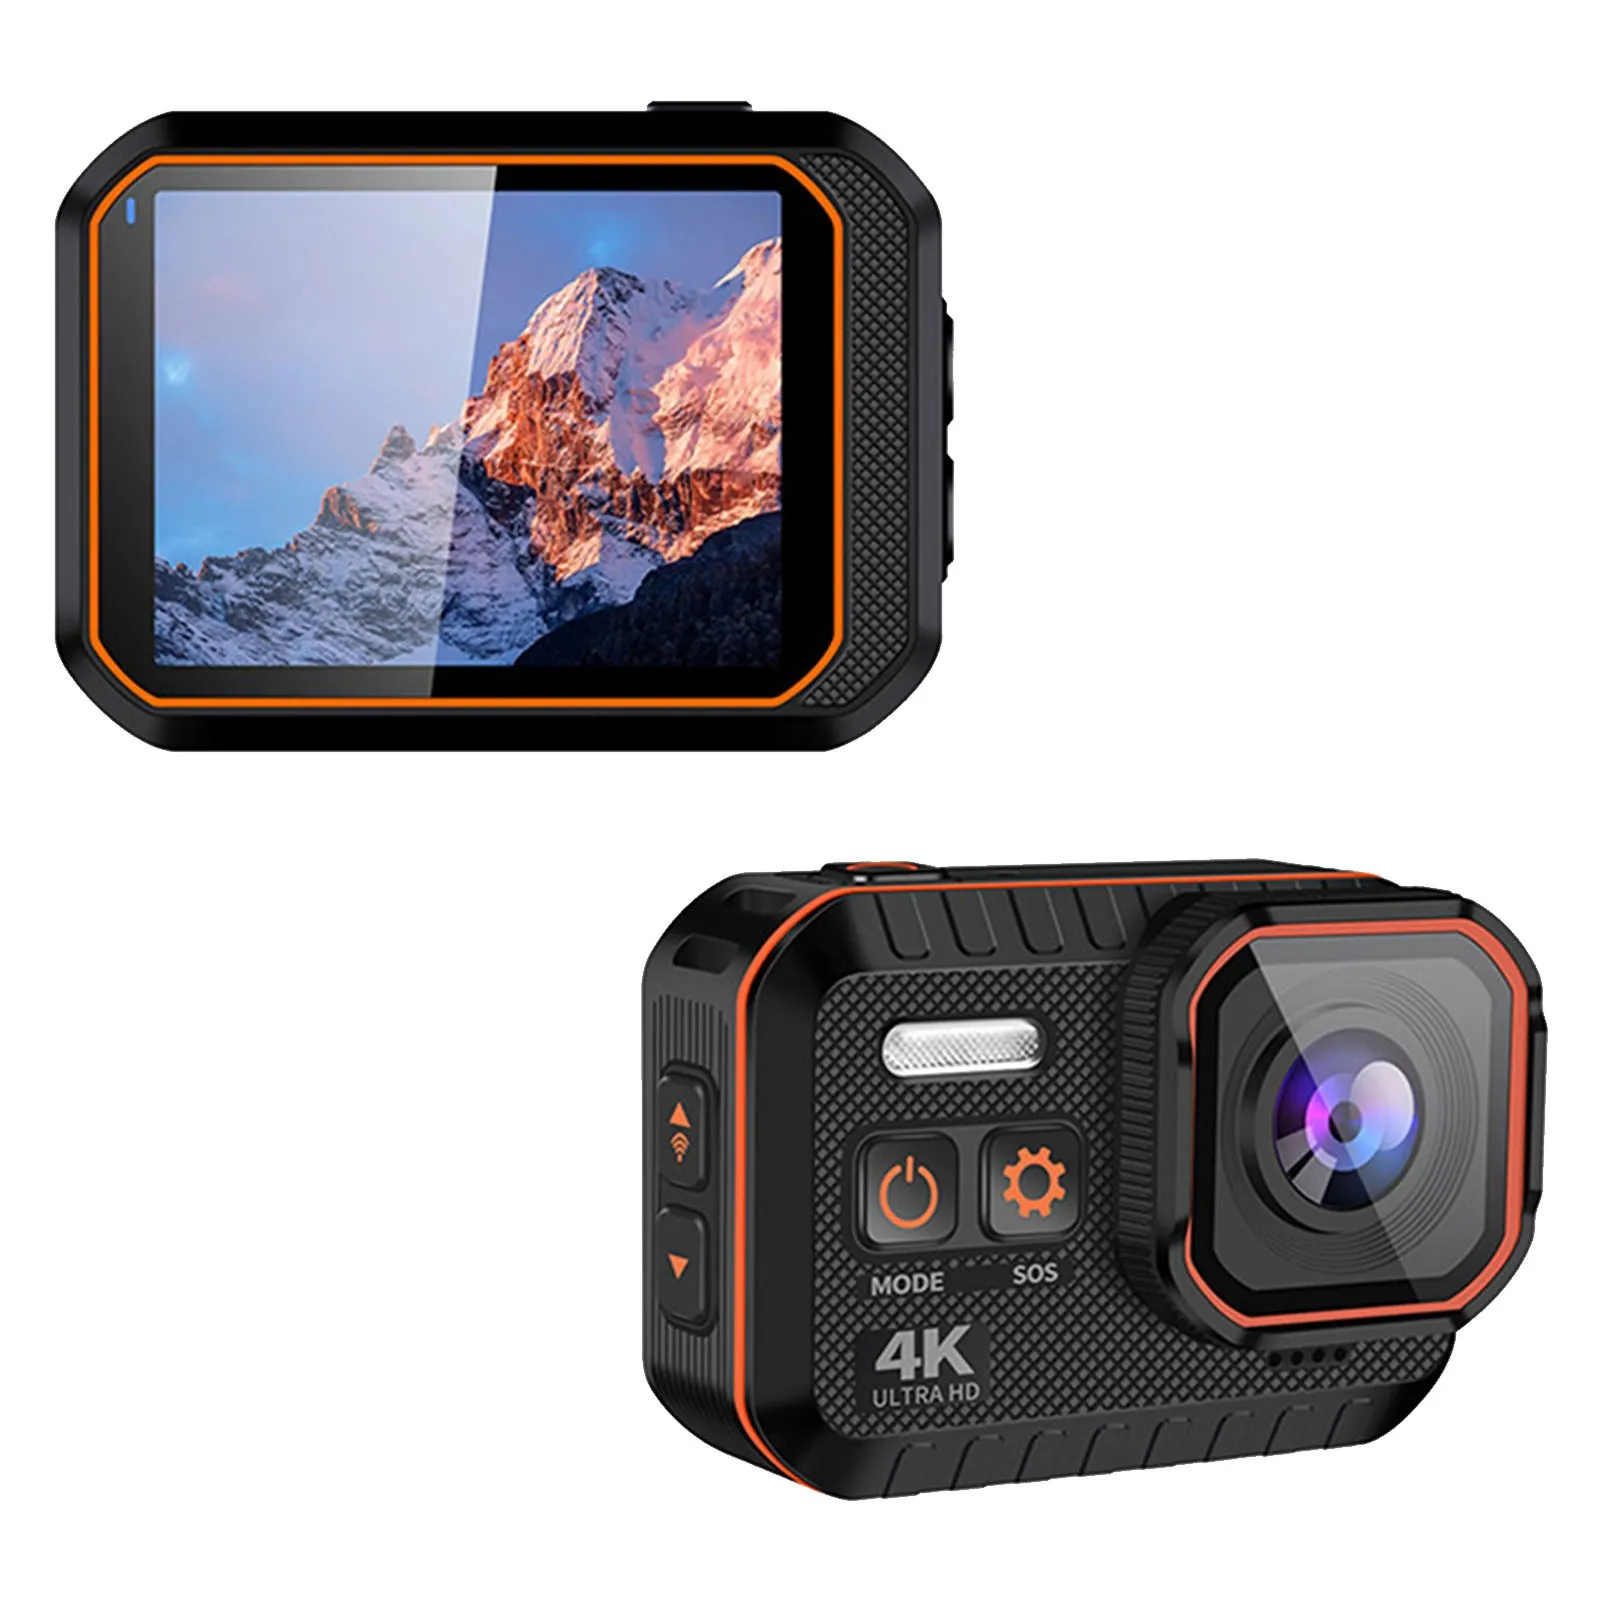 Waterproof action camera 20MP sports underwater Waterproof camera 20MP photo 1080p live broadcast 2 rechargeable battery Rushed